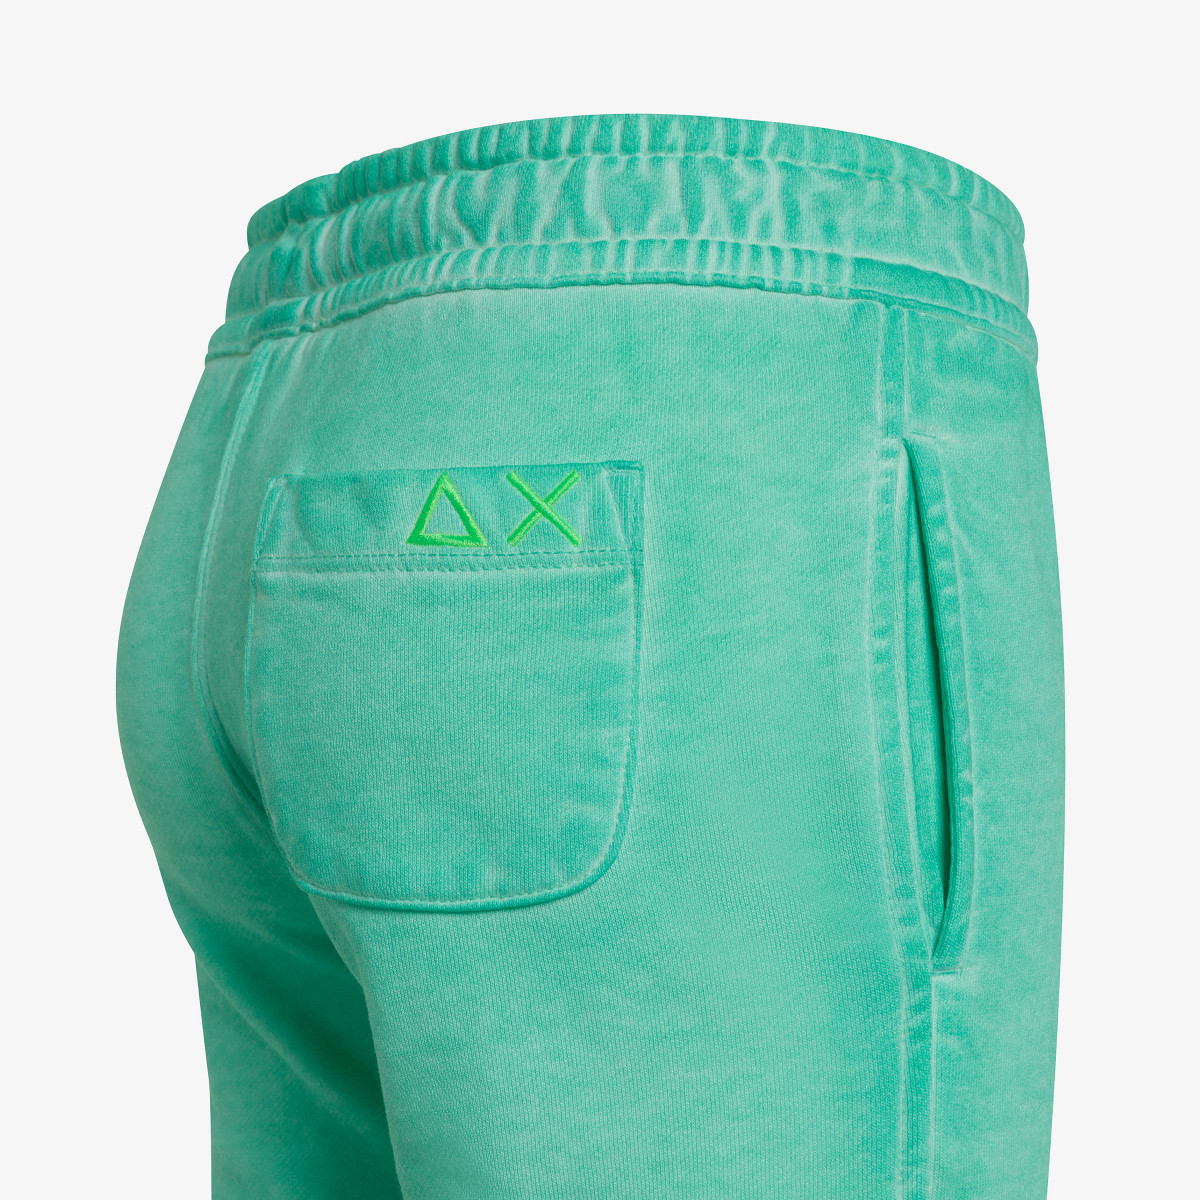 BOY'S SHORT PANT SPECIAL DYED COTT. FL. WATER